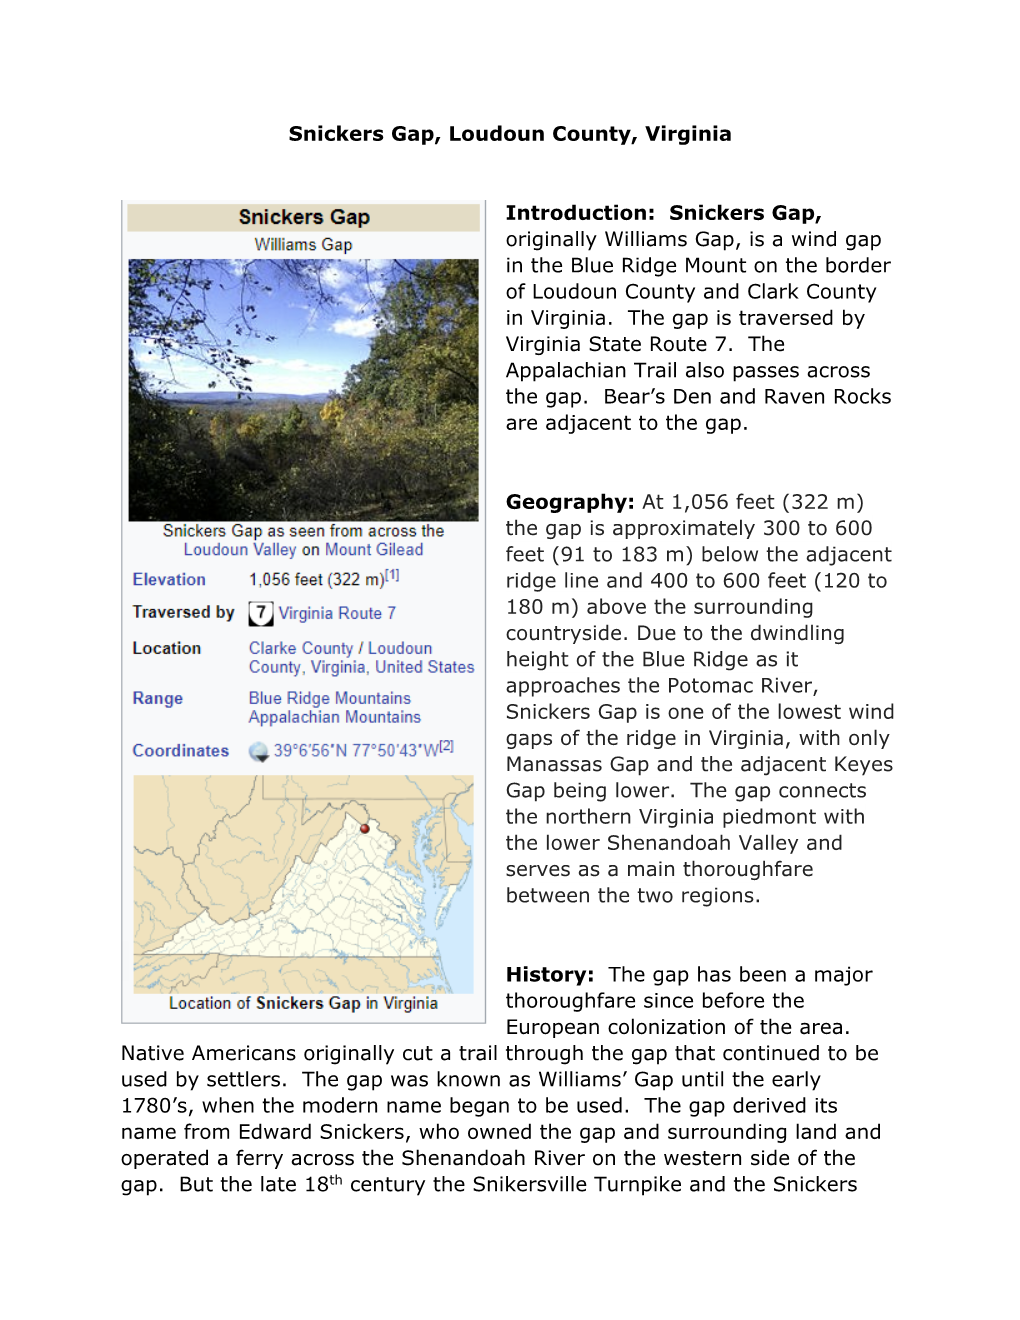 Snickers Gap, Loudoun County, Virginia Introduction: Snickers Gap